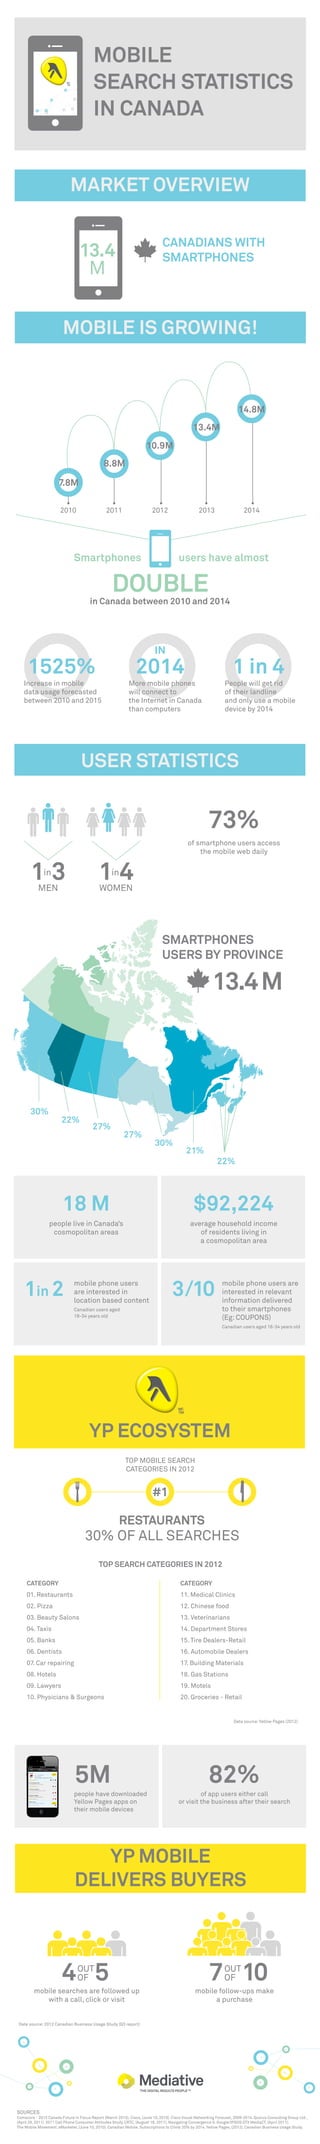 MOBILE
SEARCH STATISTICS
IN CANADA
MARKET OVERVIEW
CANADIANS WITH
SMARTPHONES

13.4
M

MOBILE IS GROWING!

14.8M
13.4M
10.9M
8.8M
7.8M
2010

2011

2012

2013

Smartphones

2014

users have almost

DOUBLE

in Canada between 2010 and 2014

IN

1525%

2014

Increase in mobile
data usage forecasted
between 2010 and 2015

1 in 4

More mobile phones
will connect to
the Internet in Canada
than computers

People will get rid
of their landline
and only use a mobile
device by 2014

USER STATISTICS

73%
13

of smartphone users access
the mobile web daily

14

in

in

MEN

WOMEN

SMARTPHONES
USERS BY PROVINCE

13.4 M

30%

22%

27%

27%

30%

21%

22%

18 M

$92,224

people live in Canada’s
cosmopolitan areas

average household income
of residents living in
a cosmopolitan area

1in 2

3/10

mobile phone users
are interested in
location based content
Canadian users aged
18-34 years old

mobile phone users are
interested in relevant
information delivered
to their smartphones
(Eg: COUPONS)
Canadian users aged 18-34 years old

YP ECOSYSTEM
TOP MOBILE SEARCH
CATEGORIES IN 2012

#1
RESTAURANTS

30% OF ALL SEARCHES
TOP SEARCH CATEGORIES IN 2012
CATEGORY

CATEGORY

01. Restaurants

11. Medical Clinics

02. Pizza

12. Chinese food

03. Beauty Salons

13. Veterinarians

04. Taxis

14. Department Stores

05. Banks

15. Tire Dealers-Retail

06. Dentists

16. Automobile Dealers

07. Car repairing

17. Building Materials

08. Hotels

18. Gas Stations

09. Lawyers

19. Motels

10. Physicians & Surgeons

20. Groceries - Retail

Data source: Yellow Pages (2012)

5M
people have downloaded
Yellow Pages apps on
their mobile devices

82%
of app users either call
or visit the business after their search

YP MOBILE
DELIVERS BUYERS

4 5
OUT
OF

mobile searches are followed up
with a call, click or visit

7 10
OUT
OF

mobile follow-ups make
a purchase

Date source: 2012 Canadian Business Usage Study (Q3 report)

SOURCES

Comscore - 2013 Canada Future in Focus Report (March 2013). Cisco, (June 10, 2010). Cisco Visual Networking Forecast, 2009-2014. Quorus Consulting Group Ltd.,
(April 29, 2011). 2011 Cell Phone Consumer Attitudes Study. CRTC, (August 18, 2011). Navigating Convergence II. Google/IPSOS OTX MediaCT, (April 2011).
The Mobile Movement. eMarketer, (June 10, 2010). Canadian Mobile. Subscriptions to Climb 20% by 2014. Yellow Pages, (2012). Canadian Business Usage Study.

 